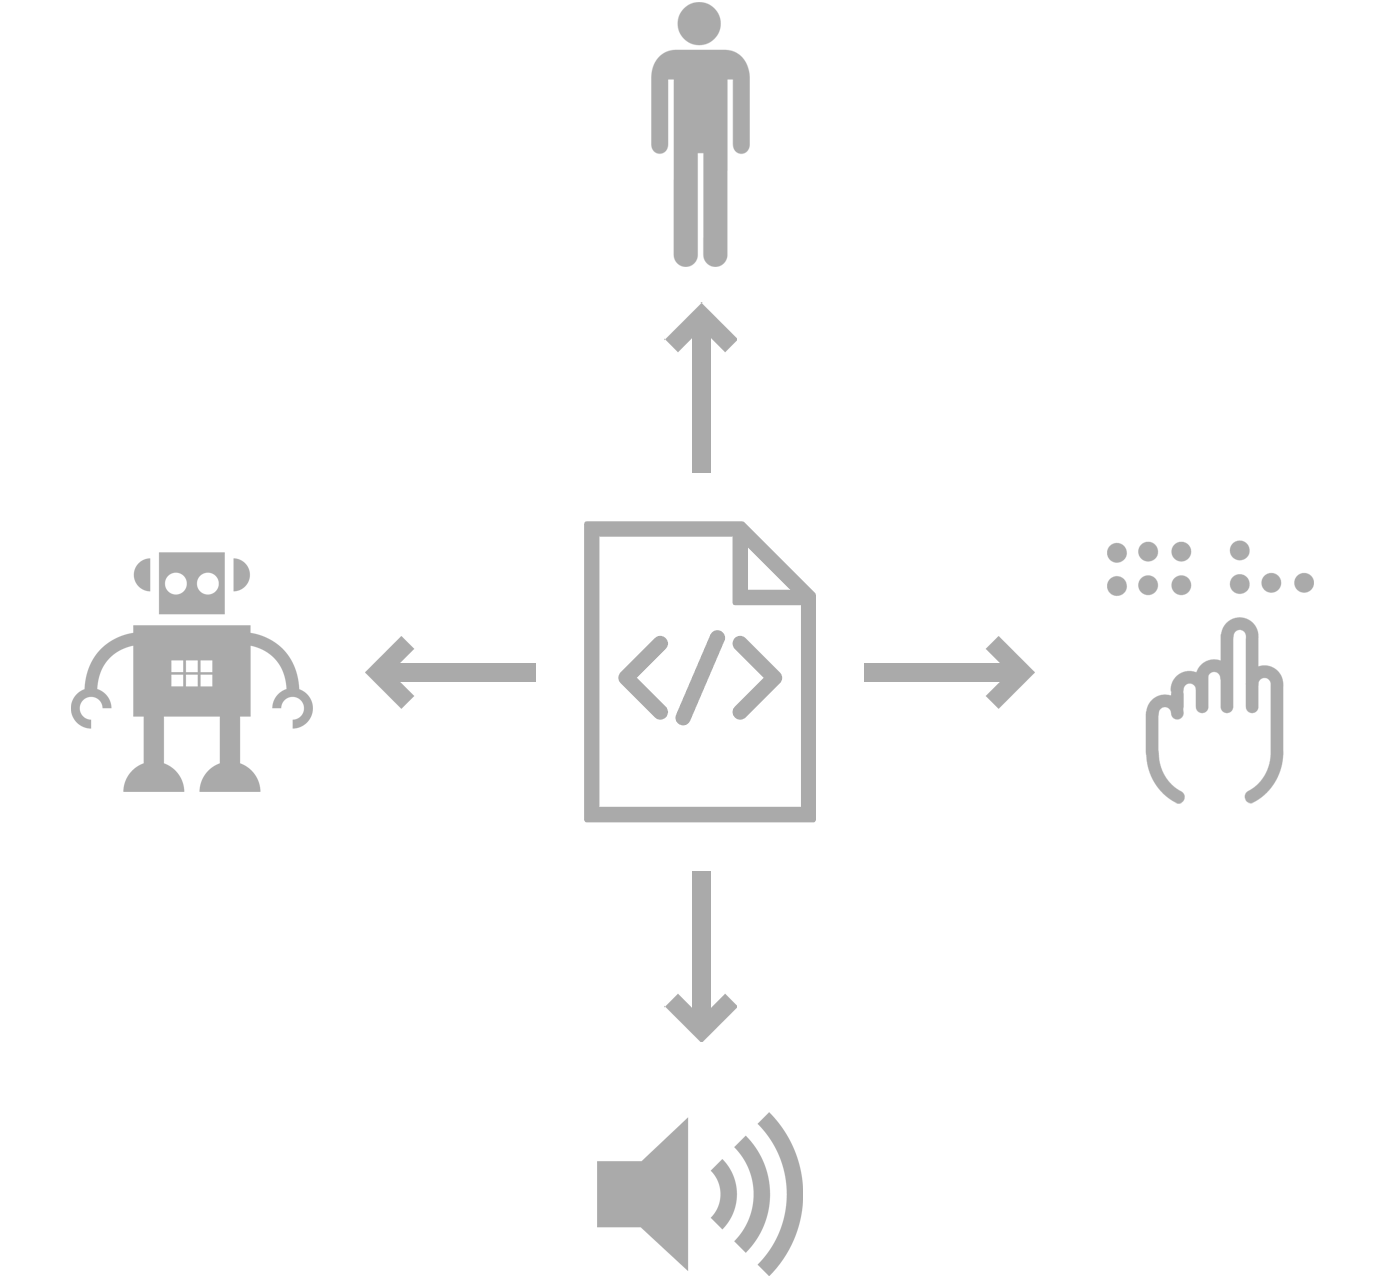 A diagram showing a web document being accessed by a robot, human, screen reader and braille display